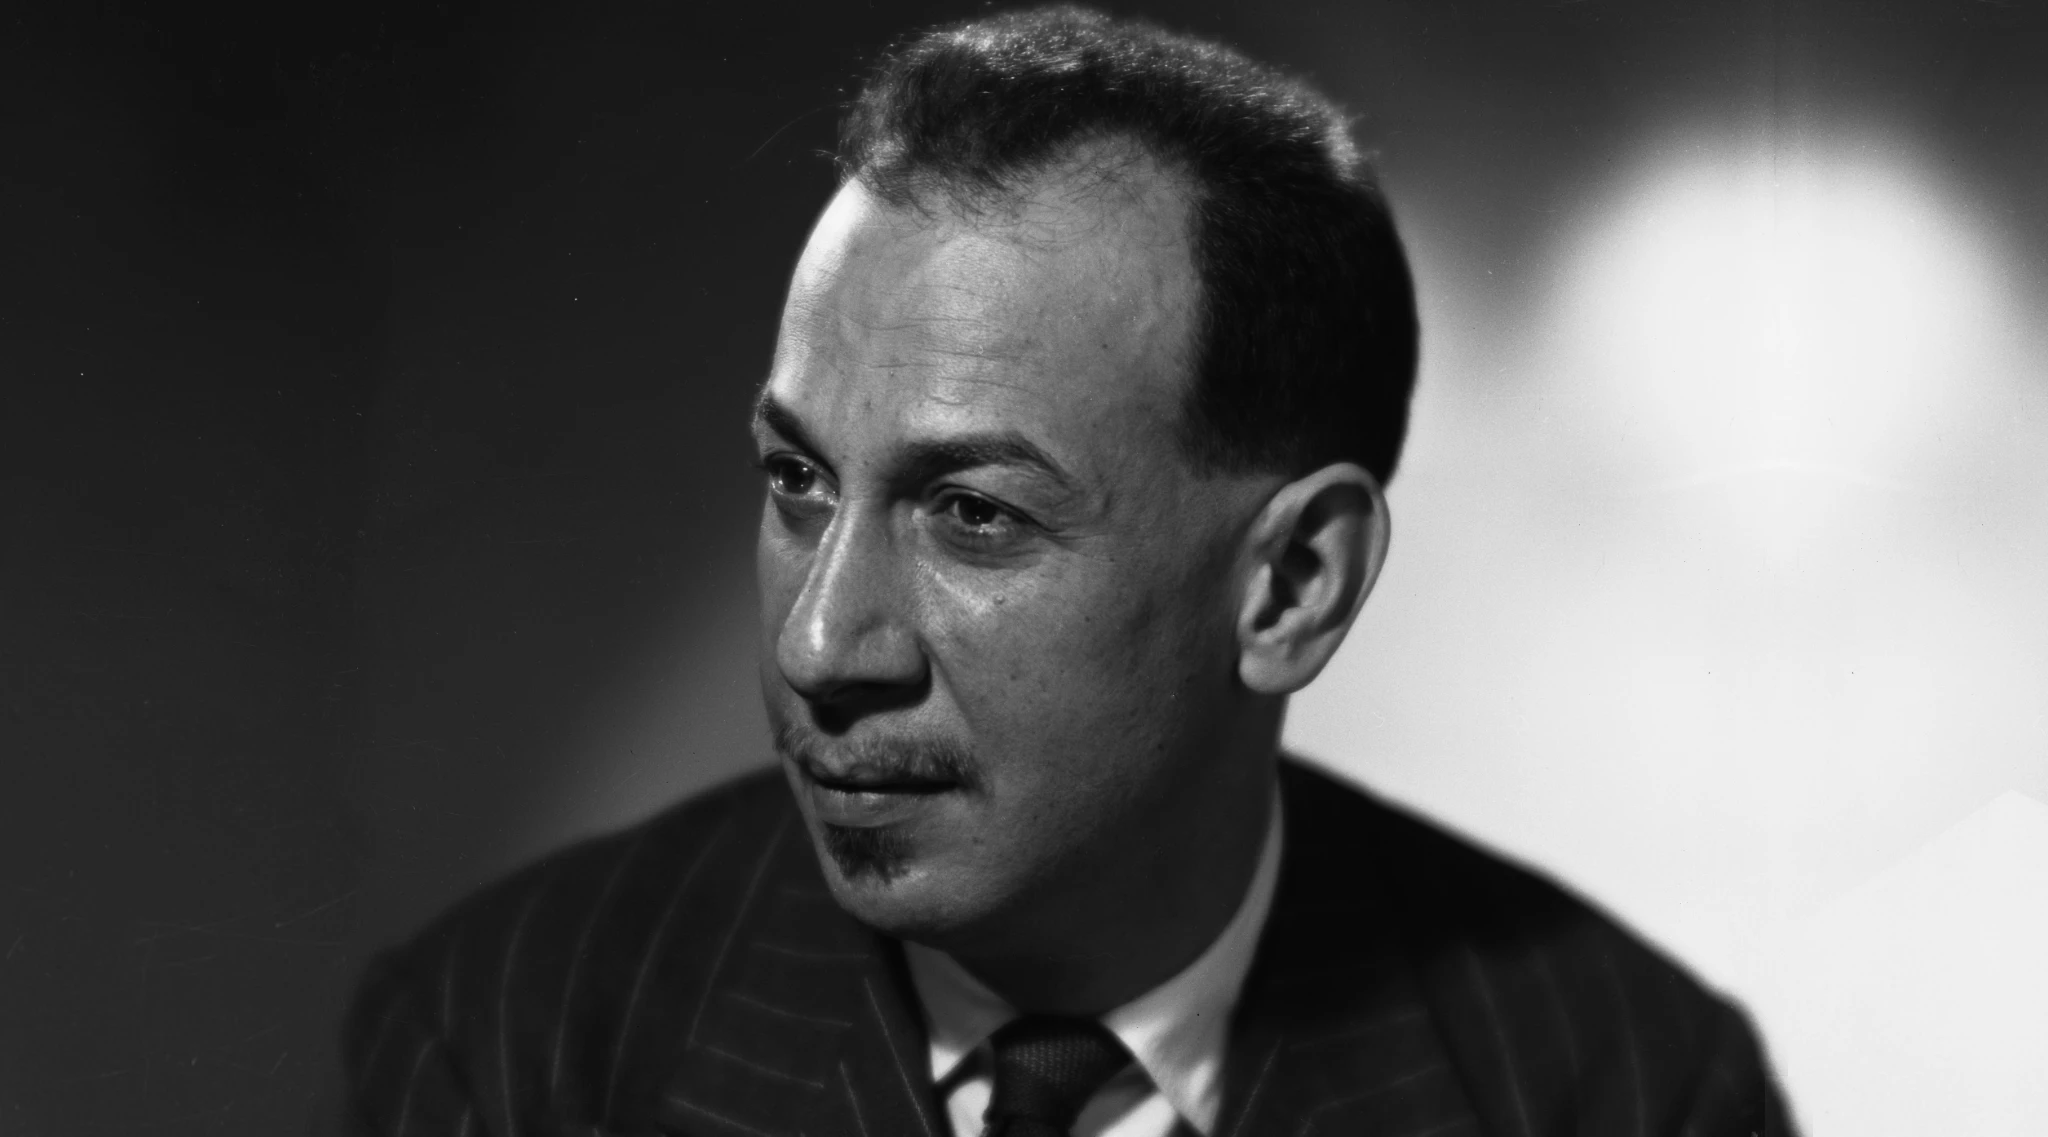 Remembering José Ferrer, the Pioneering Hispanic Actor Who Made Oscars History (Exclusive)